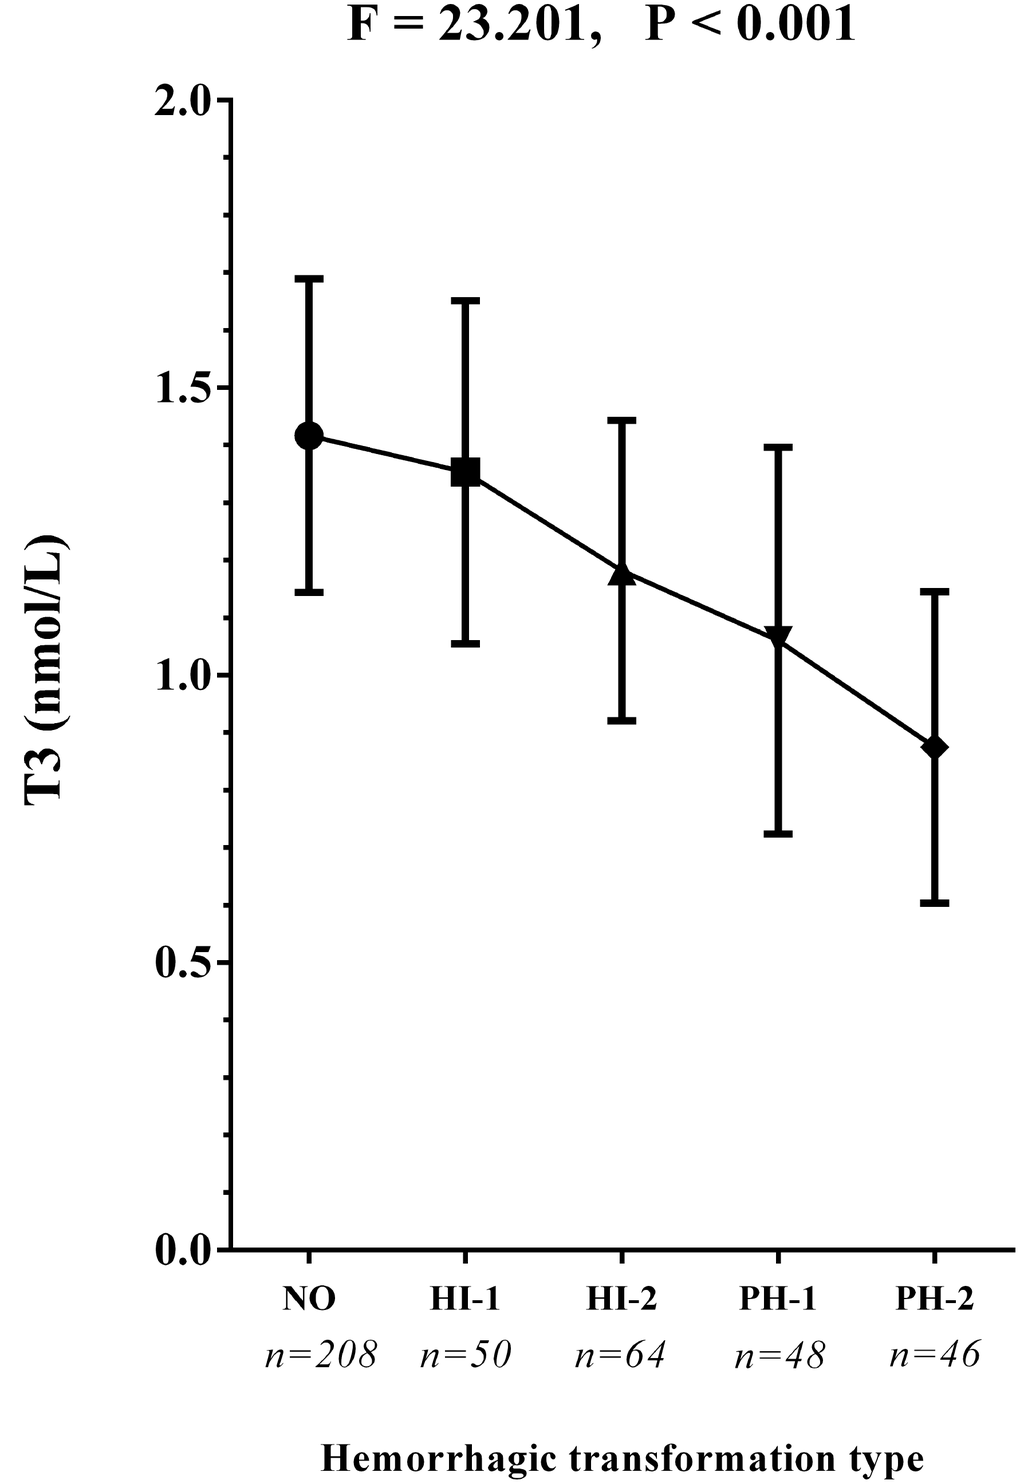 The T3 concentrations in the subcategorized groups of HT. Each data point and error bar correspond to the mean and standard deviation of T3 concentration by the subcategorized groups of HT. The line chart shows a gradual decease of T3 concentrations as the HT became more severe. HI-1, hemorrhagic infarct type 1; HI-2, hemorrhagic infarct type 2; PH-1, parenchymal hematoma type 1; PH-2, parenchymal hematoma type 2.